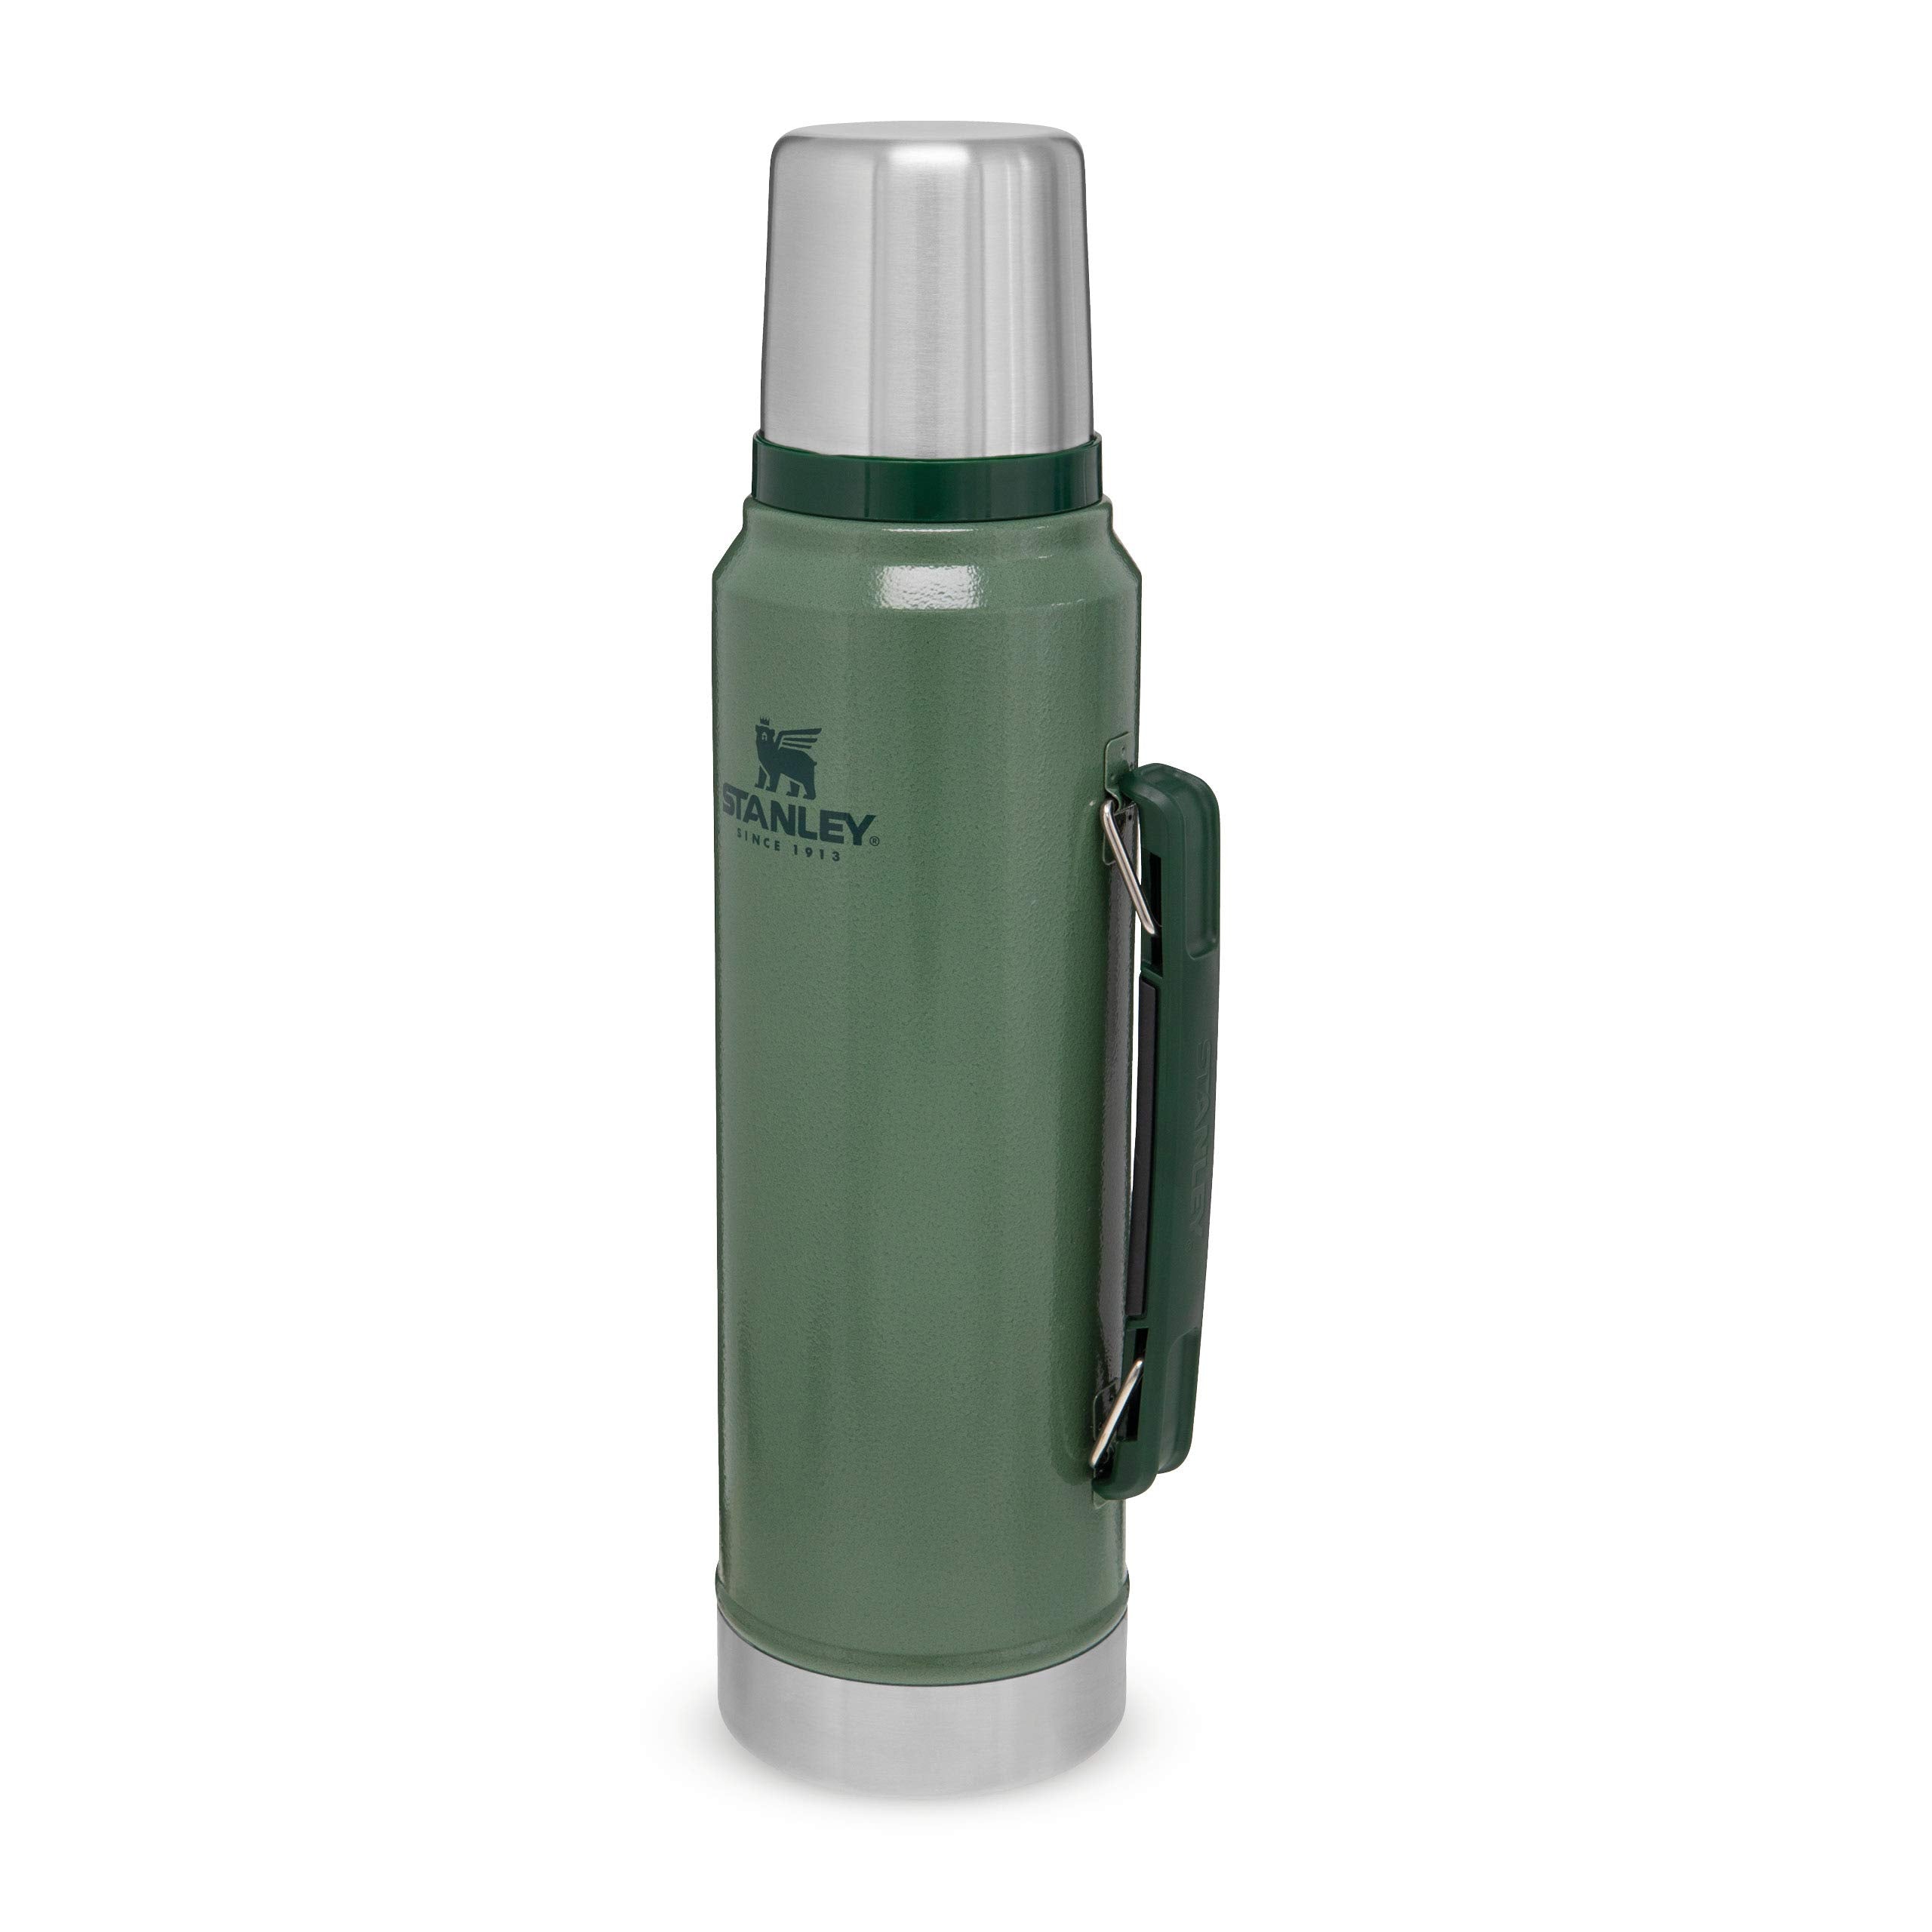 Stanley Classic Legendary Thermos Flask 1L Hammertone Green – BPA-free Stainless Steel Thermos - Flask for Hot Drink Keeps Cold or Hot for 24 Hours - Leakproof Lid Doubles as Cup - Dishwasher Safe